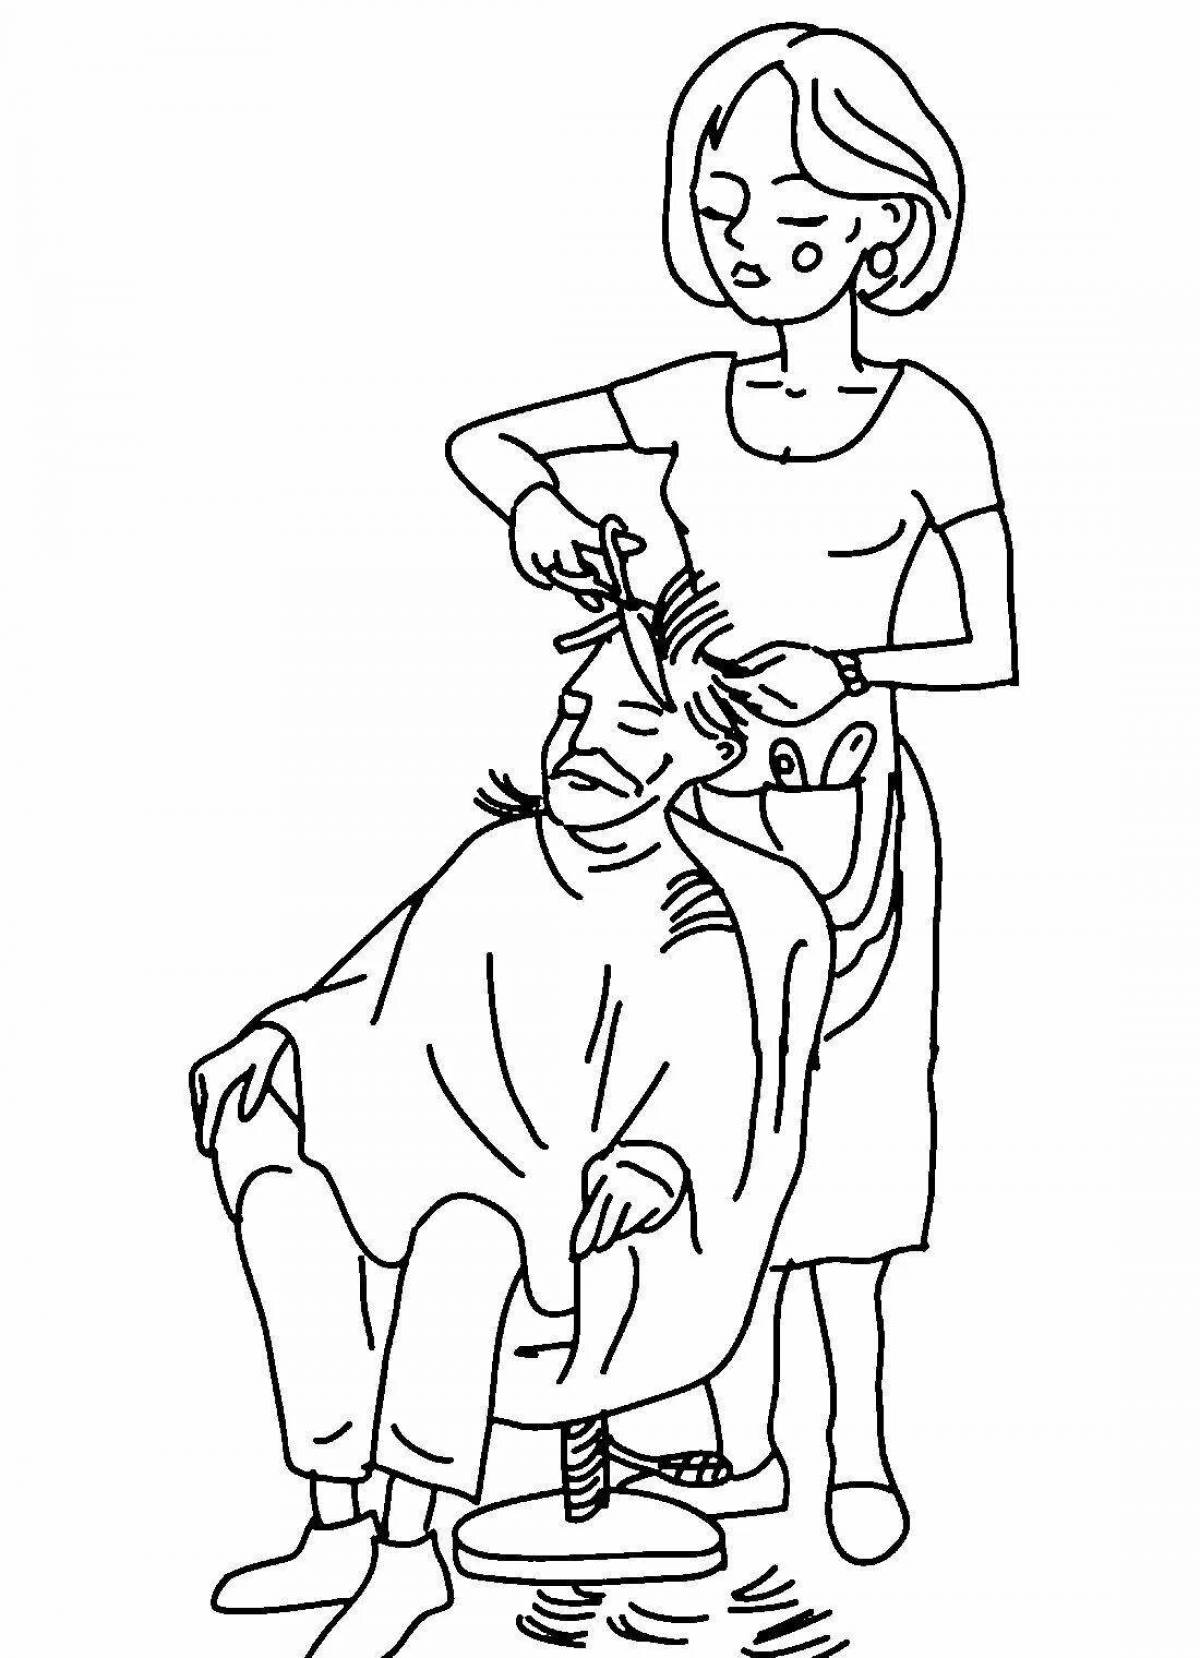 Colorful hairdresser coloring page